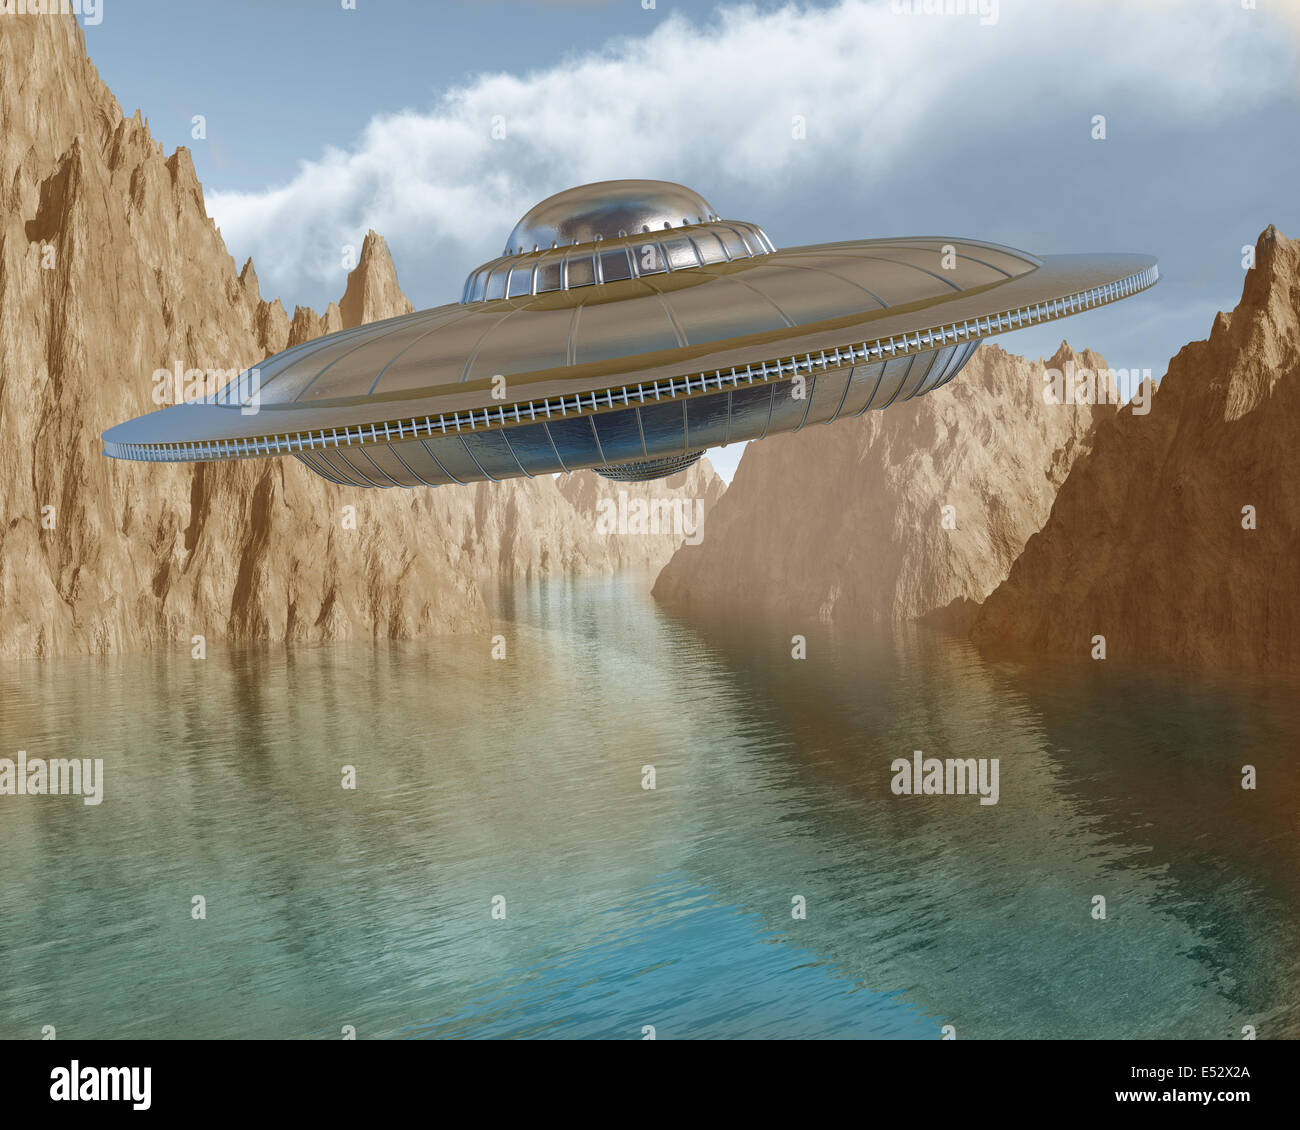 Illustration of a flying saucer hovering in the sky Stock Photo